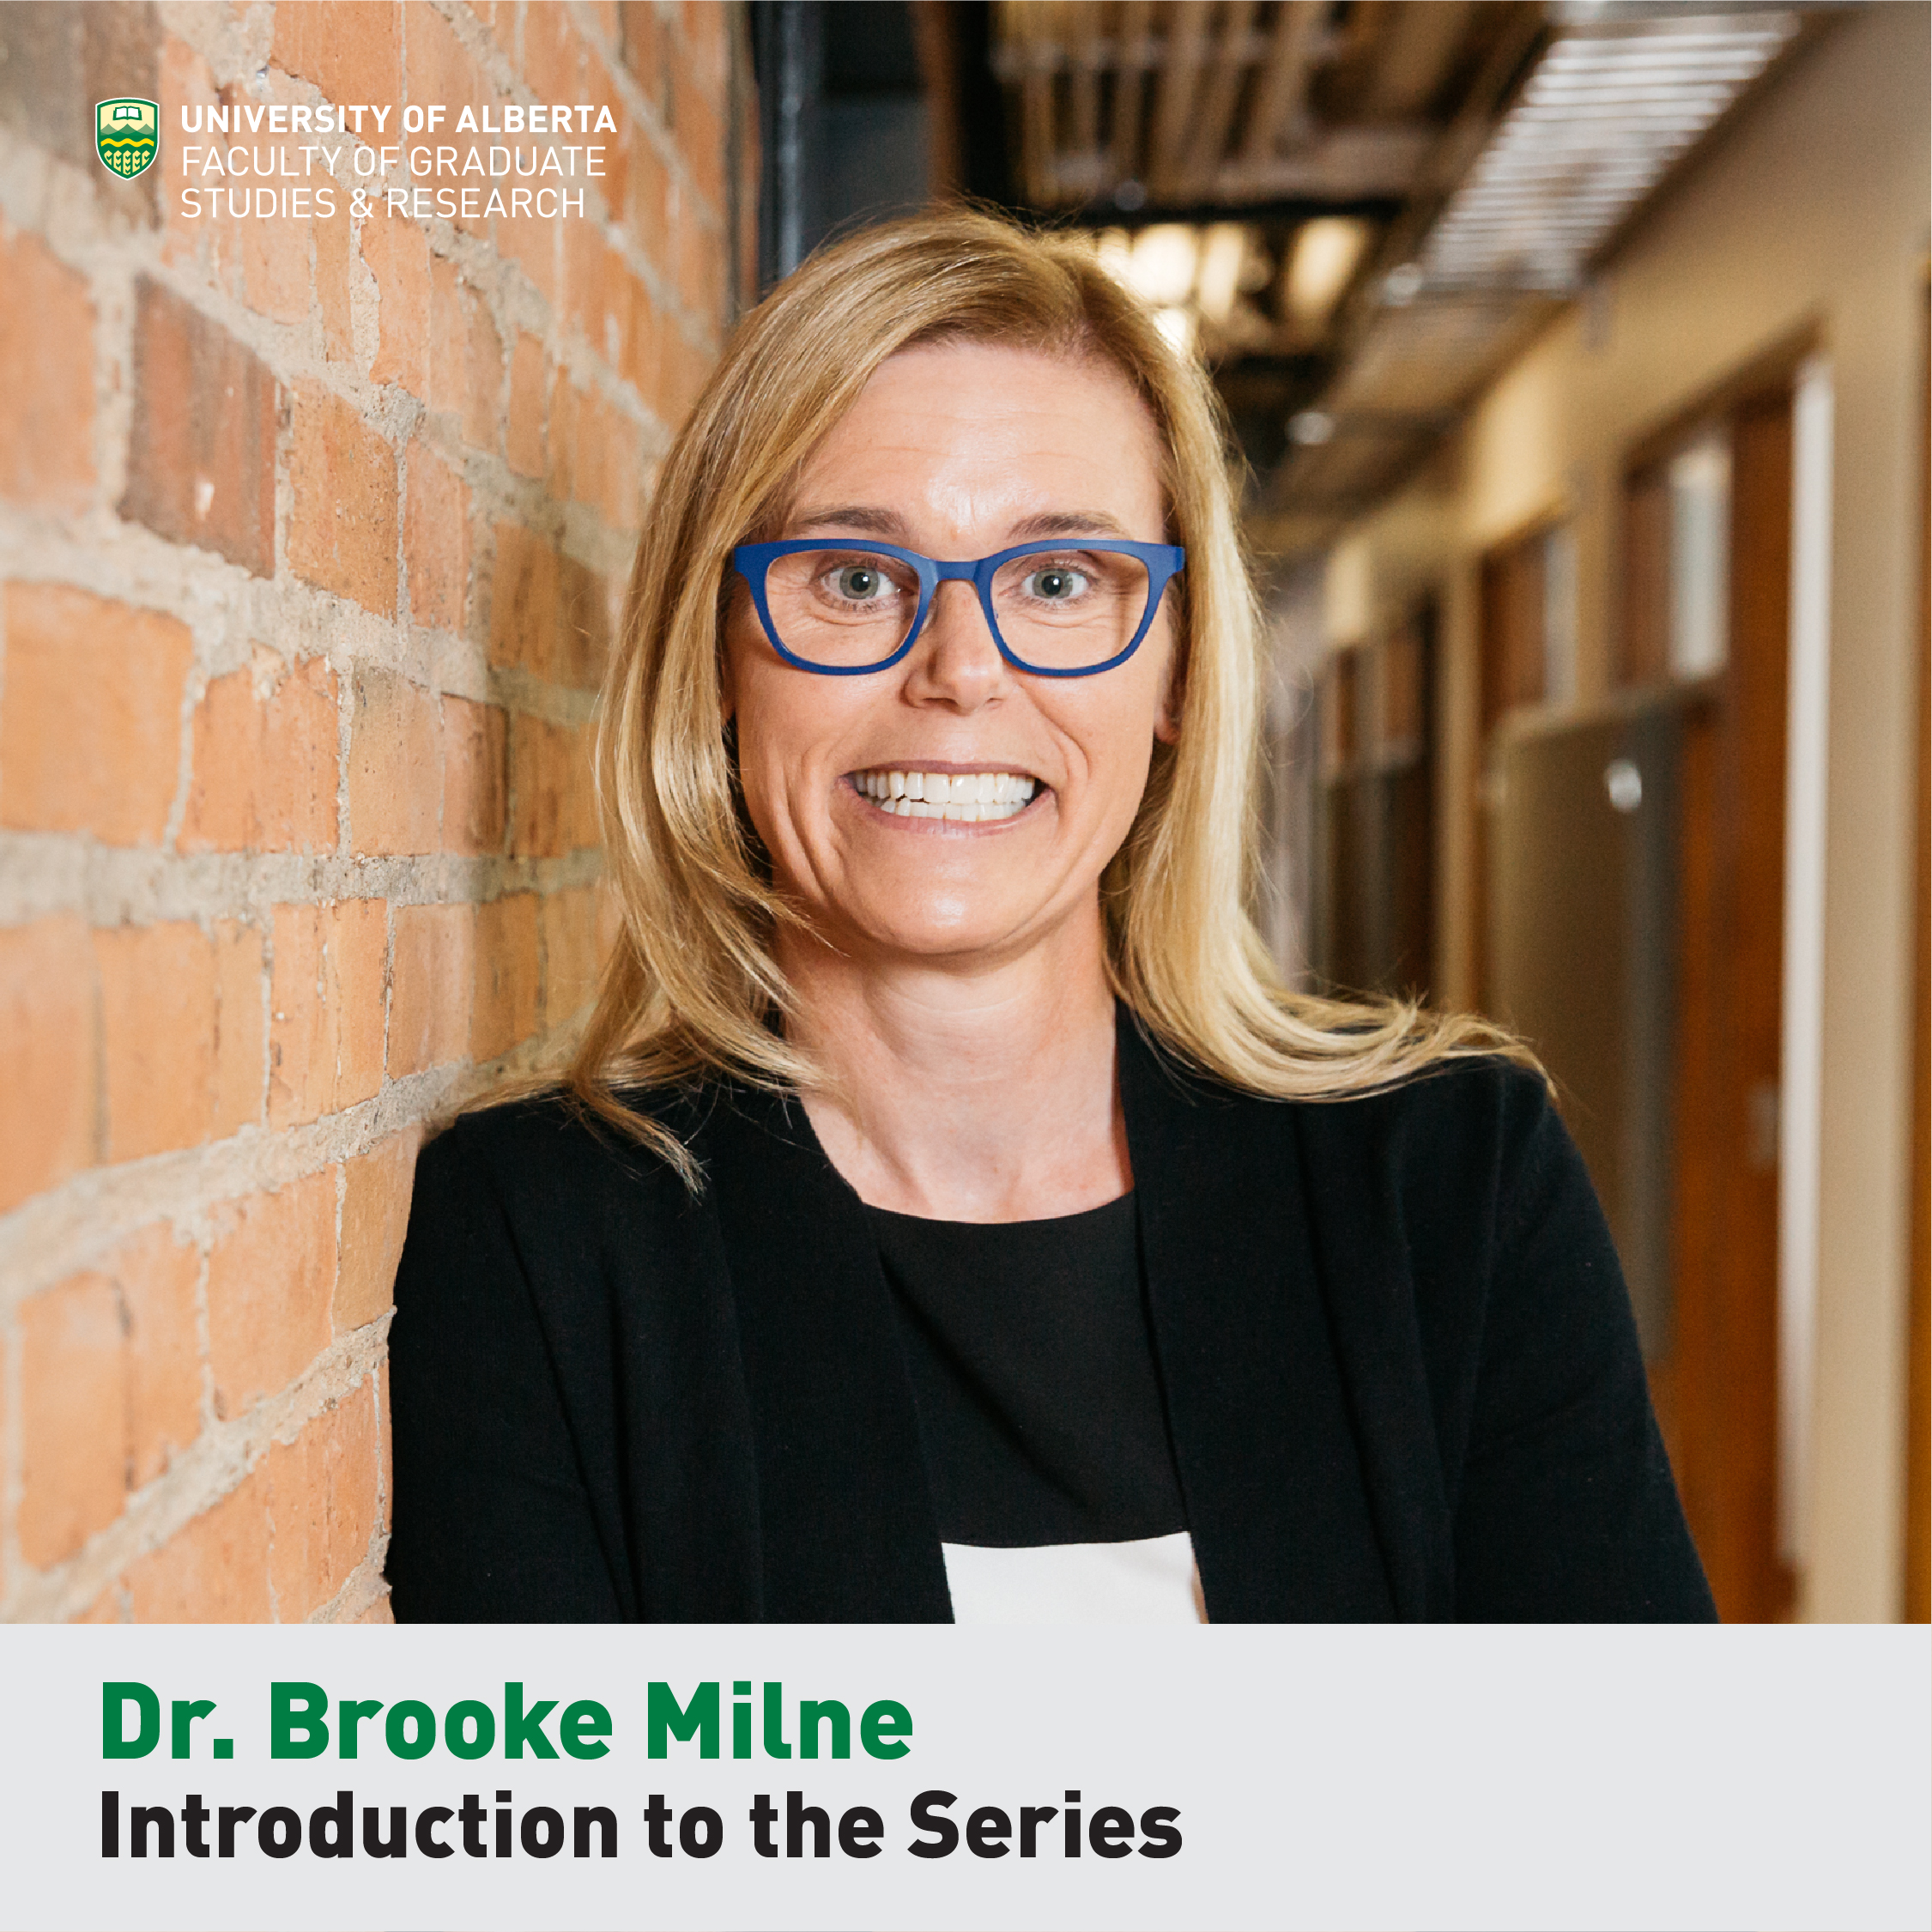 Dr. Brooke Milne, Introduction to the series